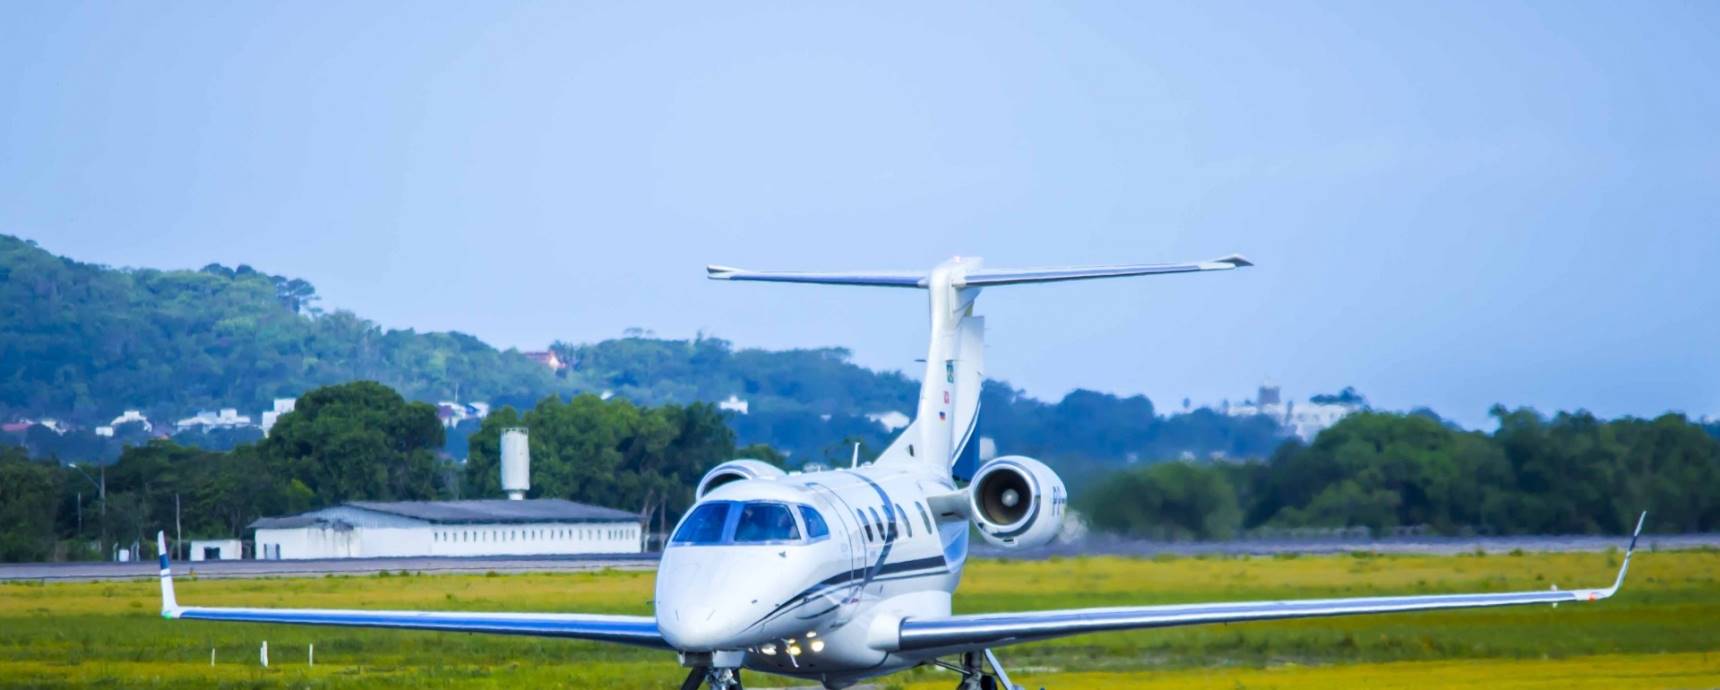 Floripa Airport Executive Service: discover the exclusive service for executive aviation crew and passengers